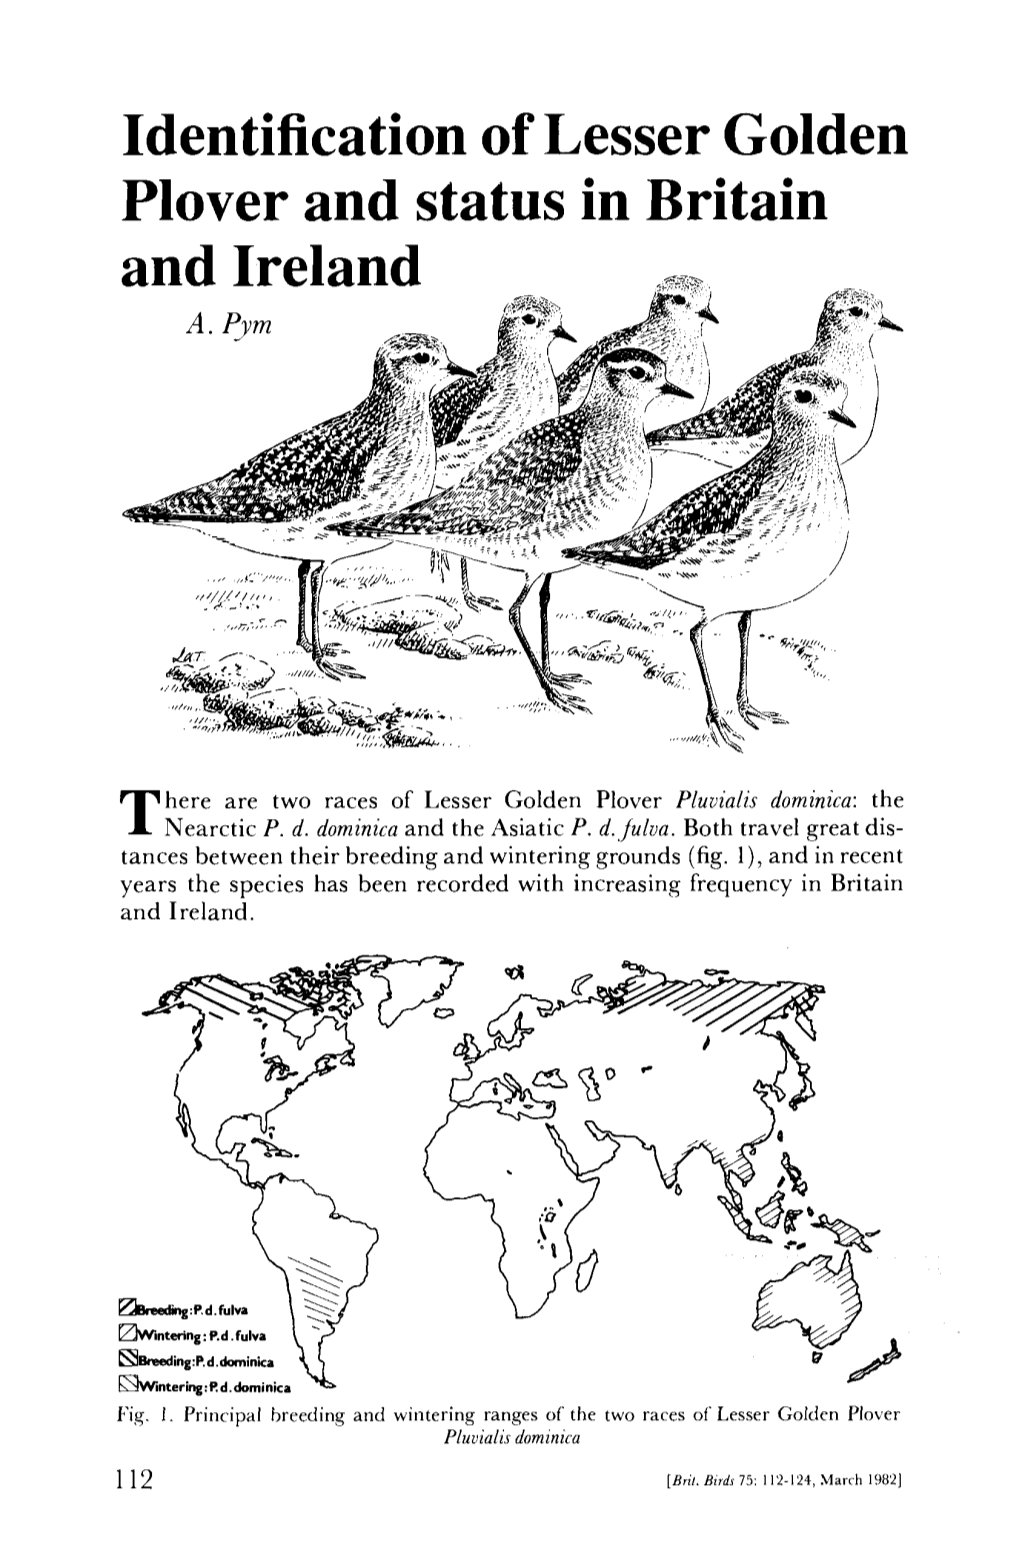 Identification of Lesser Golden Plover and Status in Britain and Ireland ^